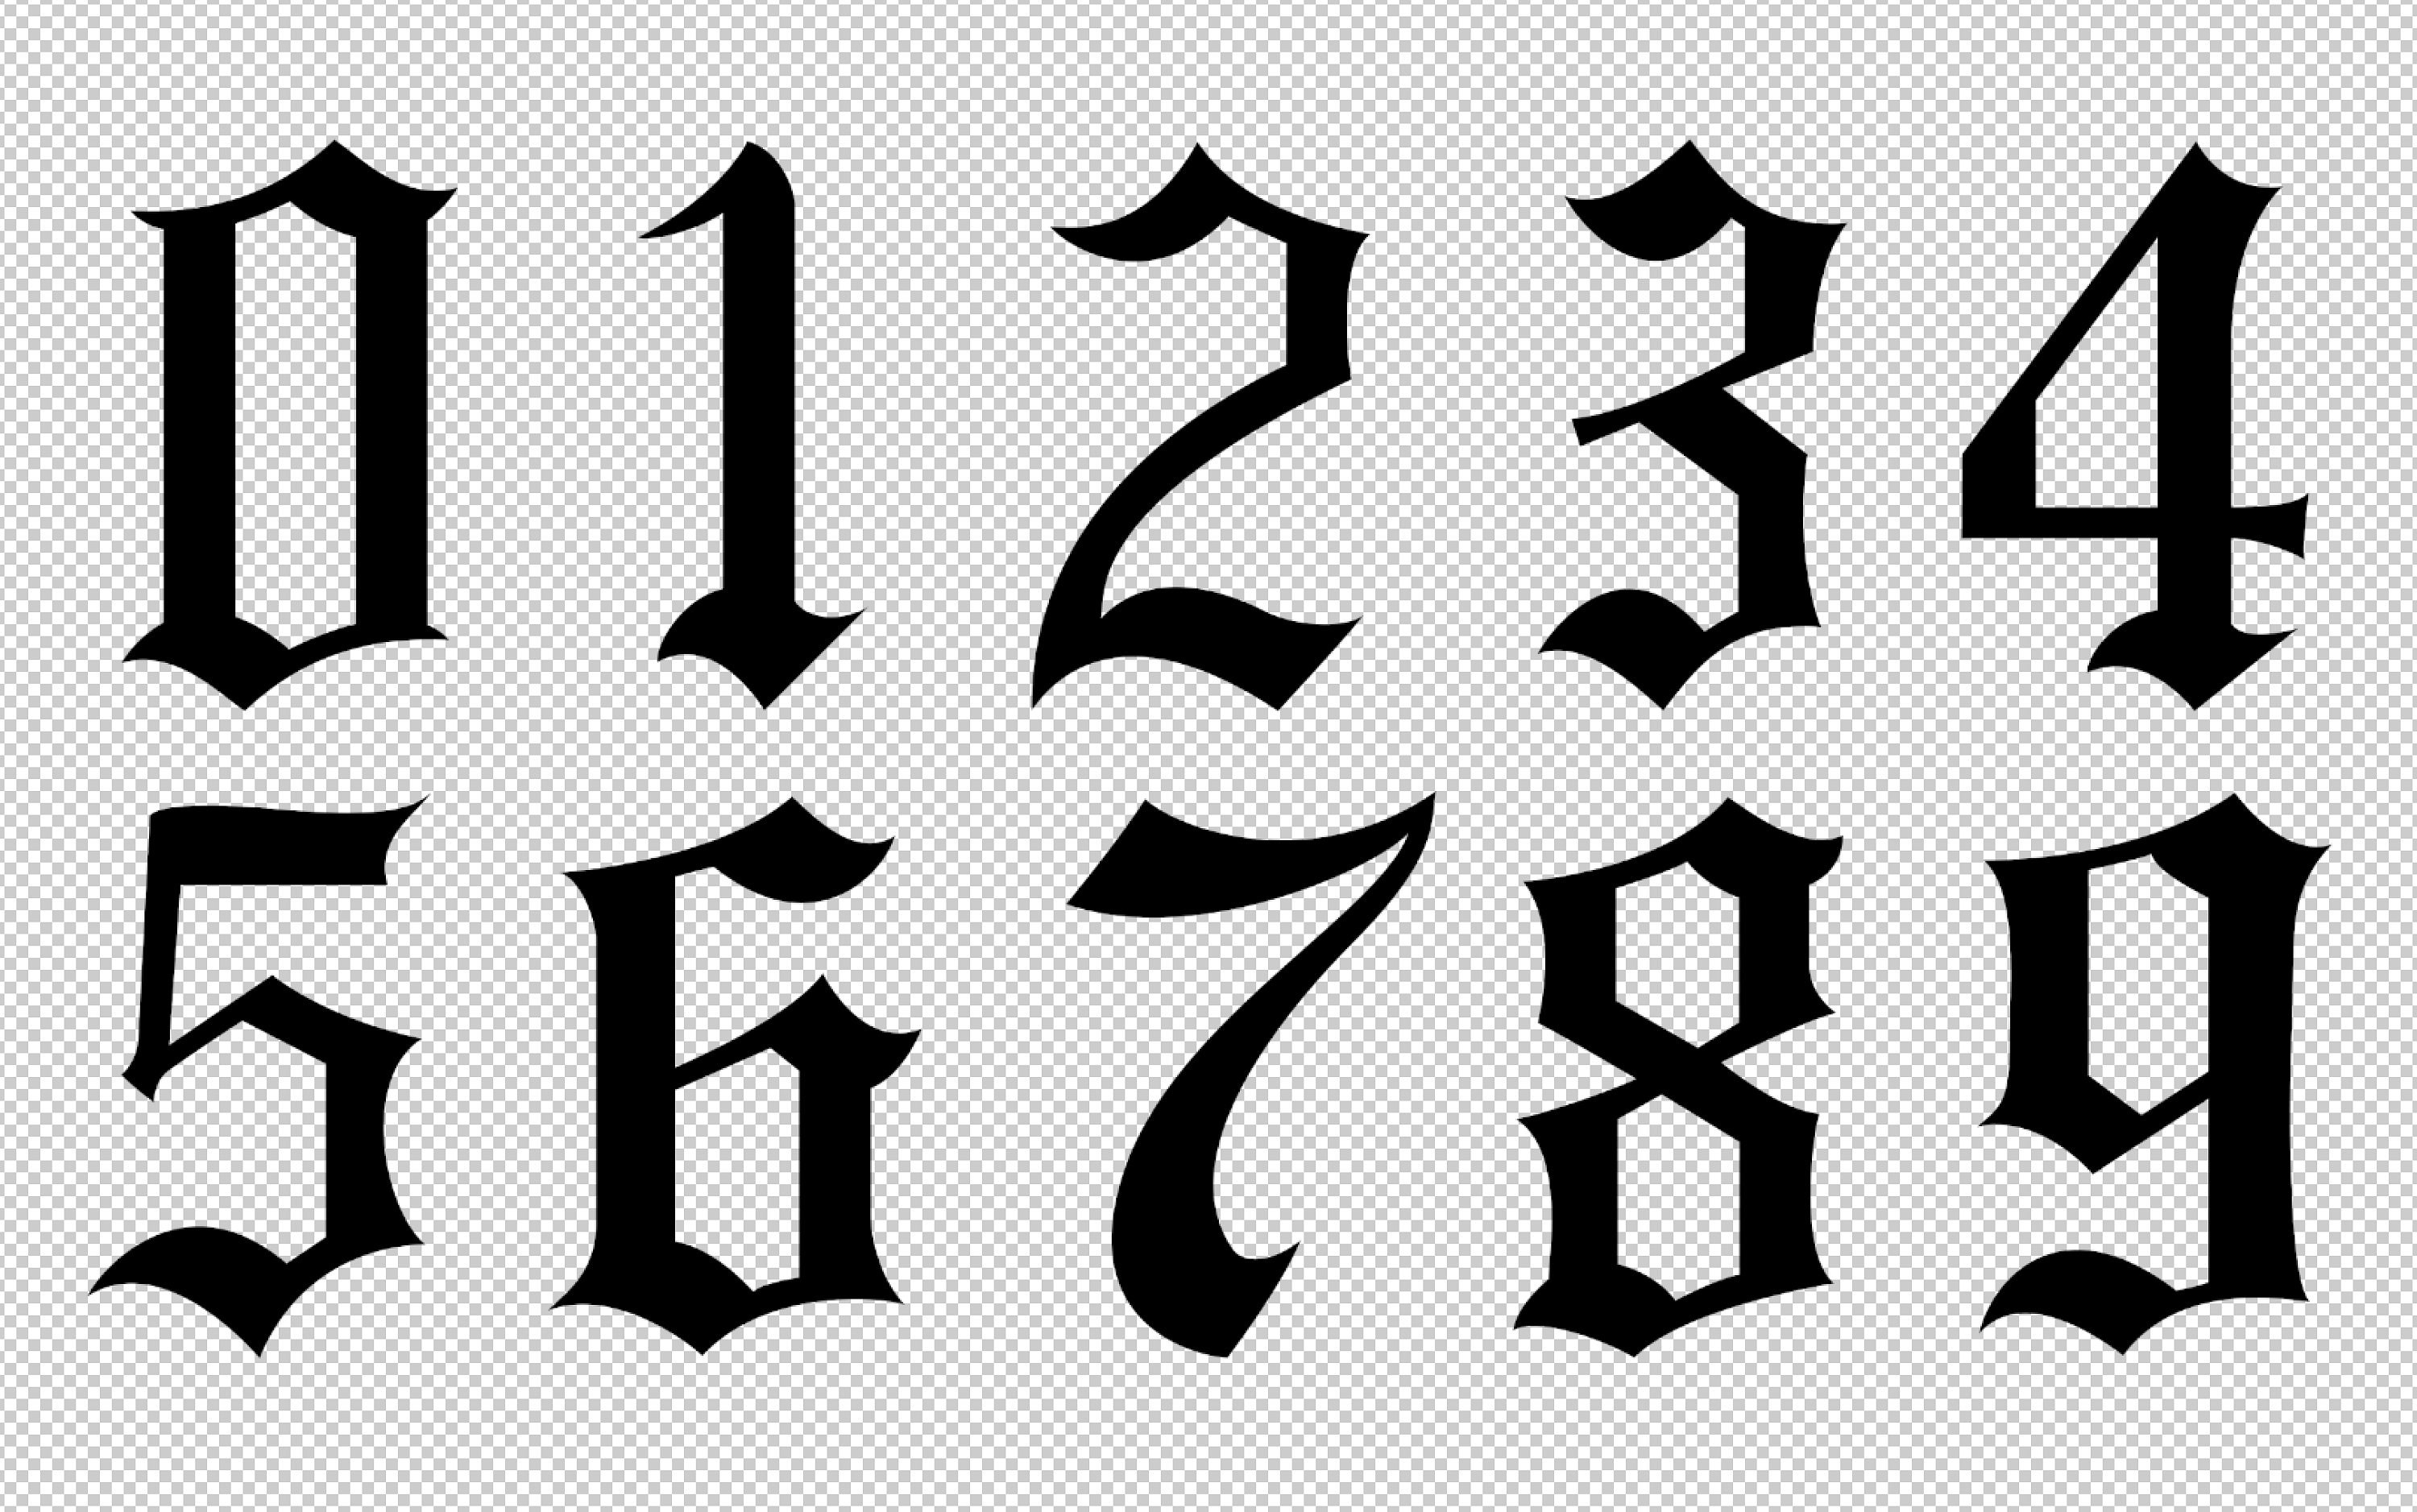 4. Gothic Number Font Tattoos - wide 4